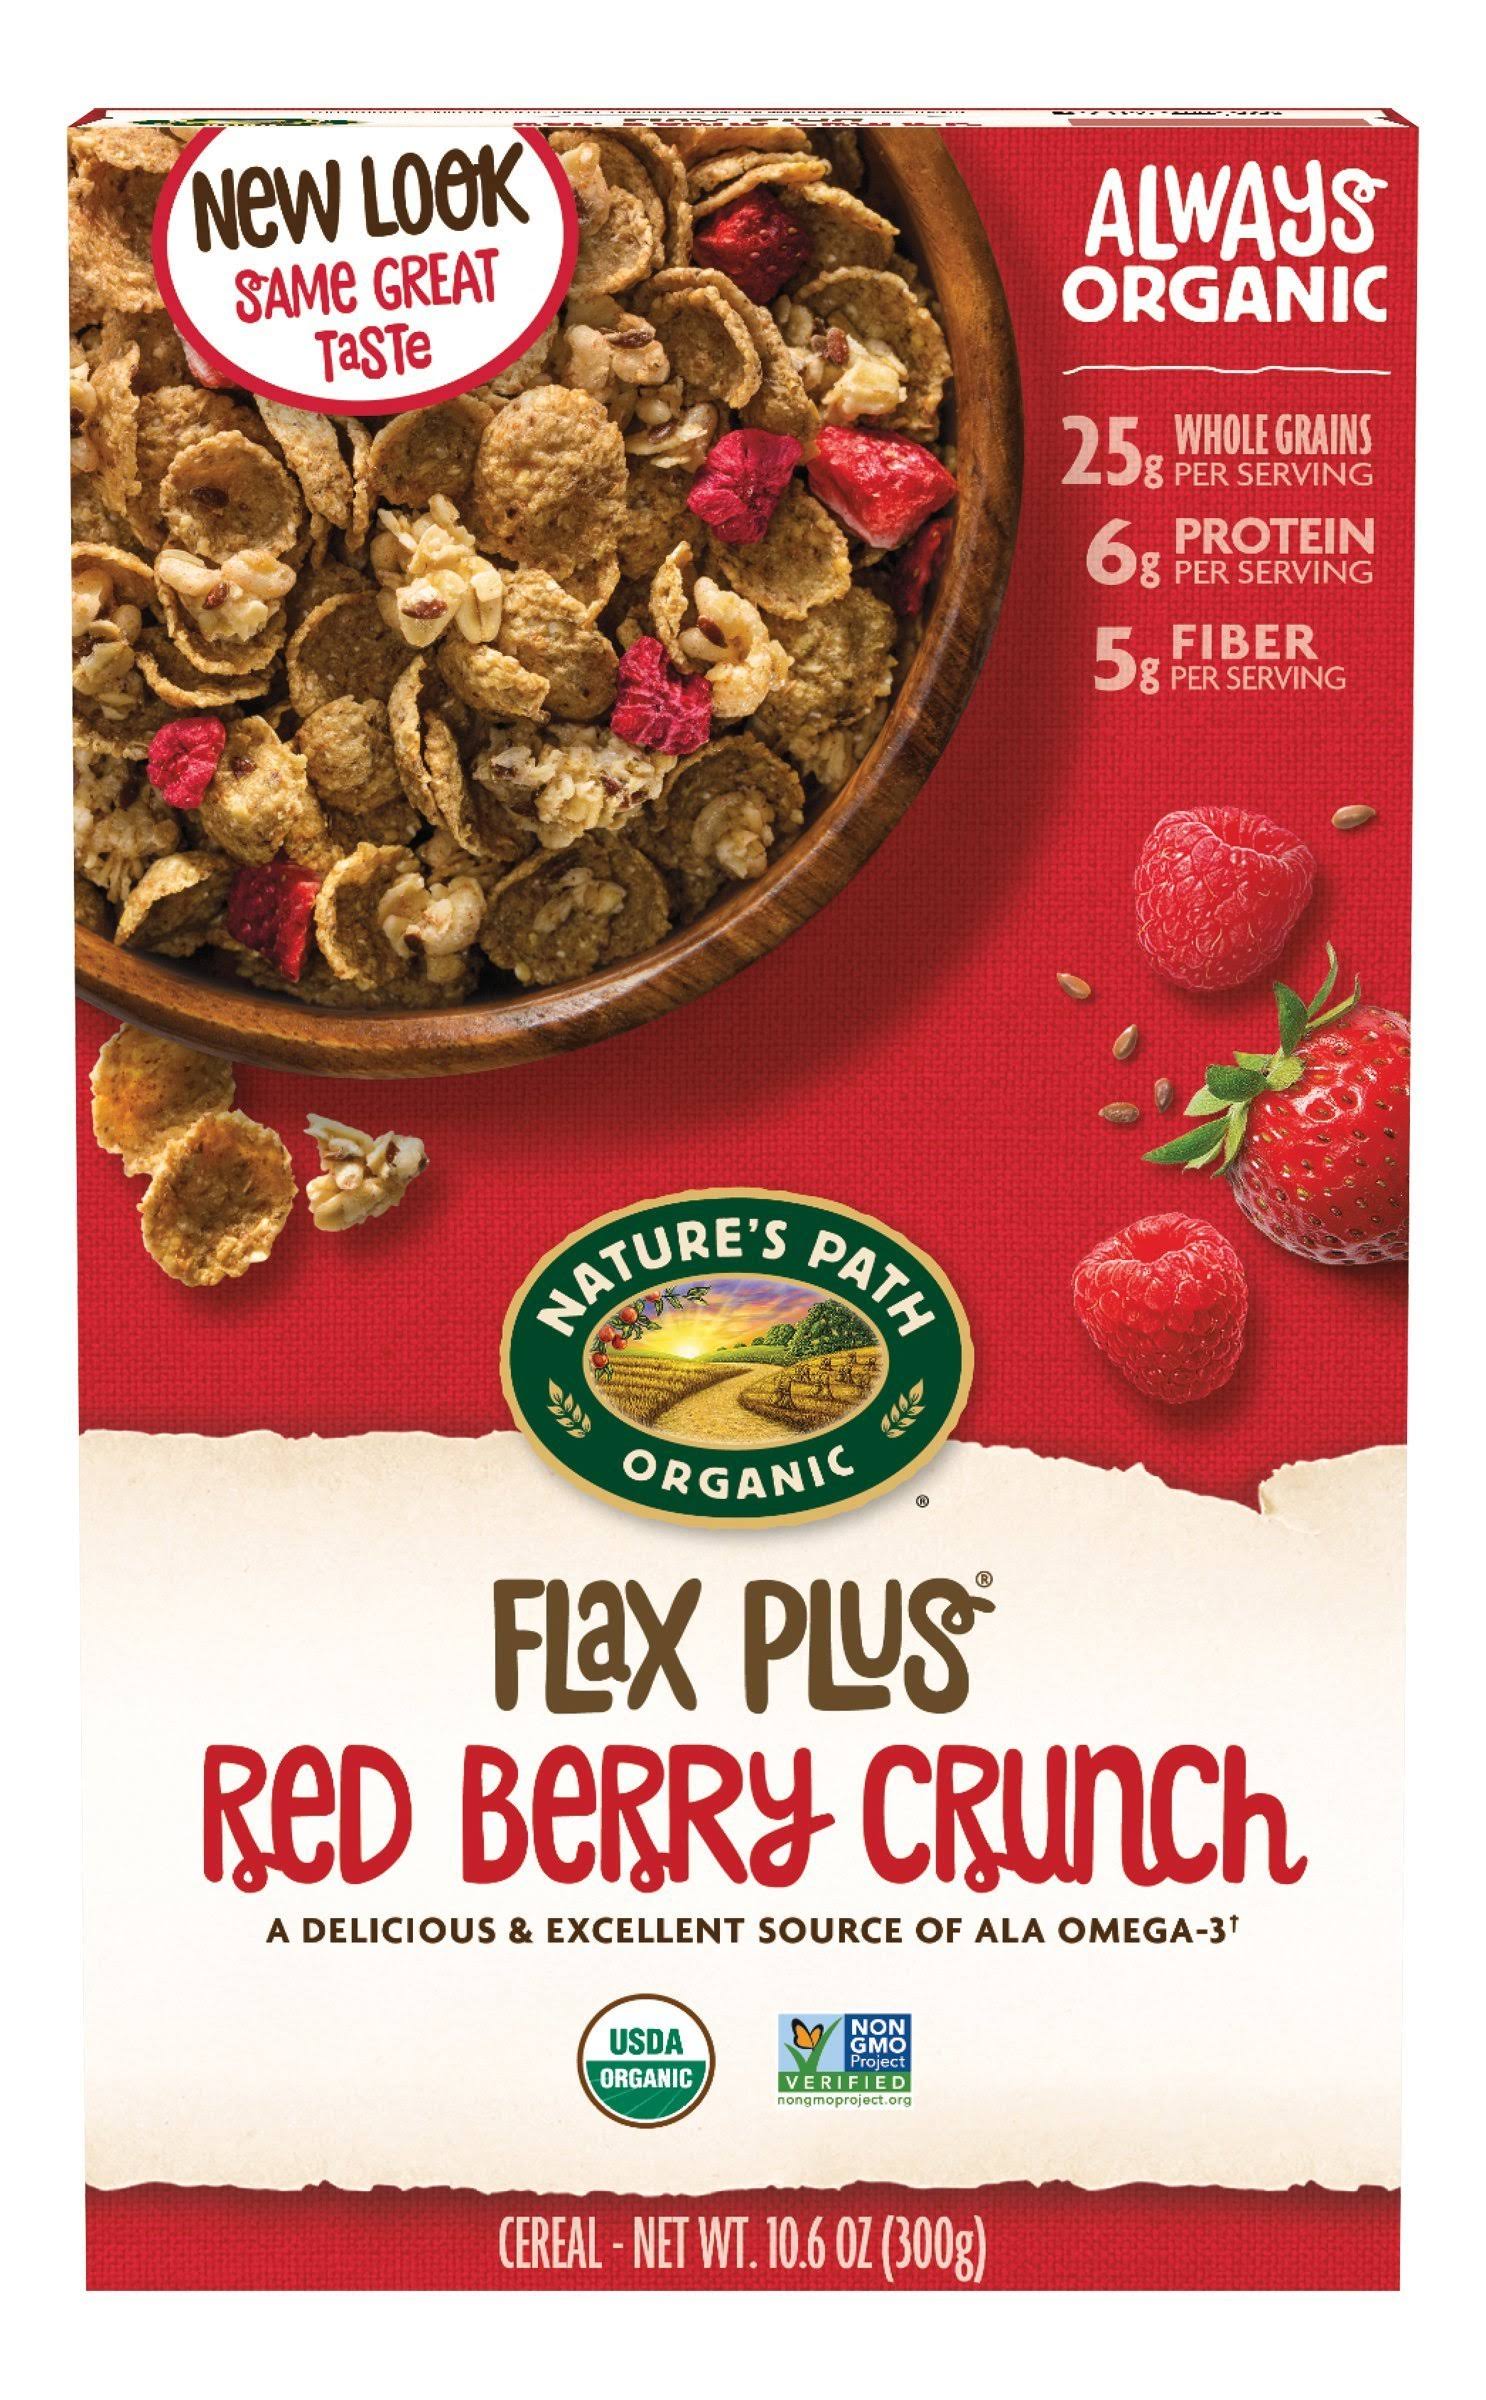 Nature's Path Organic Cold Flax Plus Cereal - Red Berry Crunch, 300g